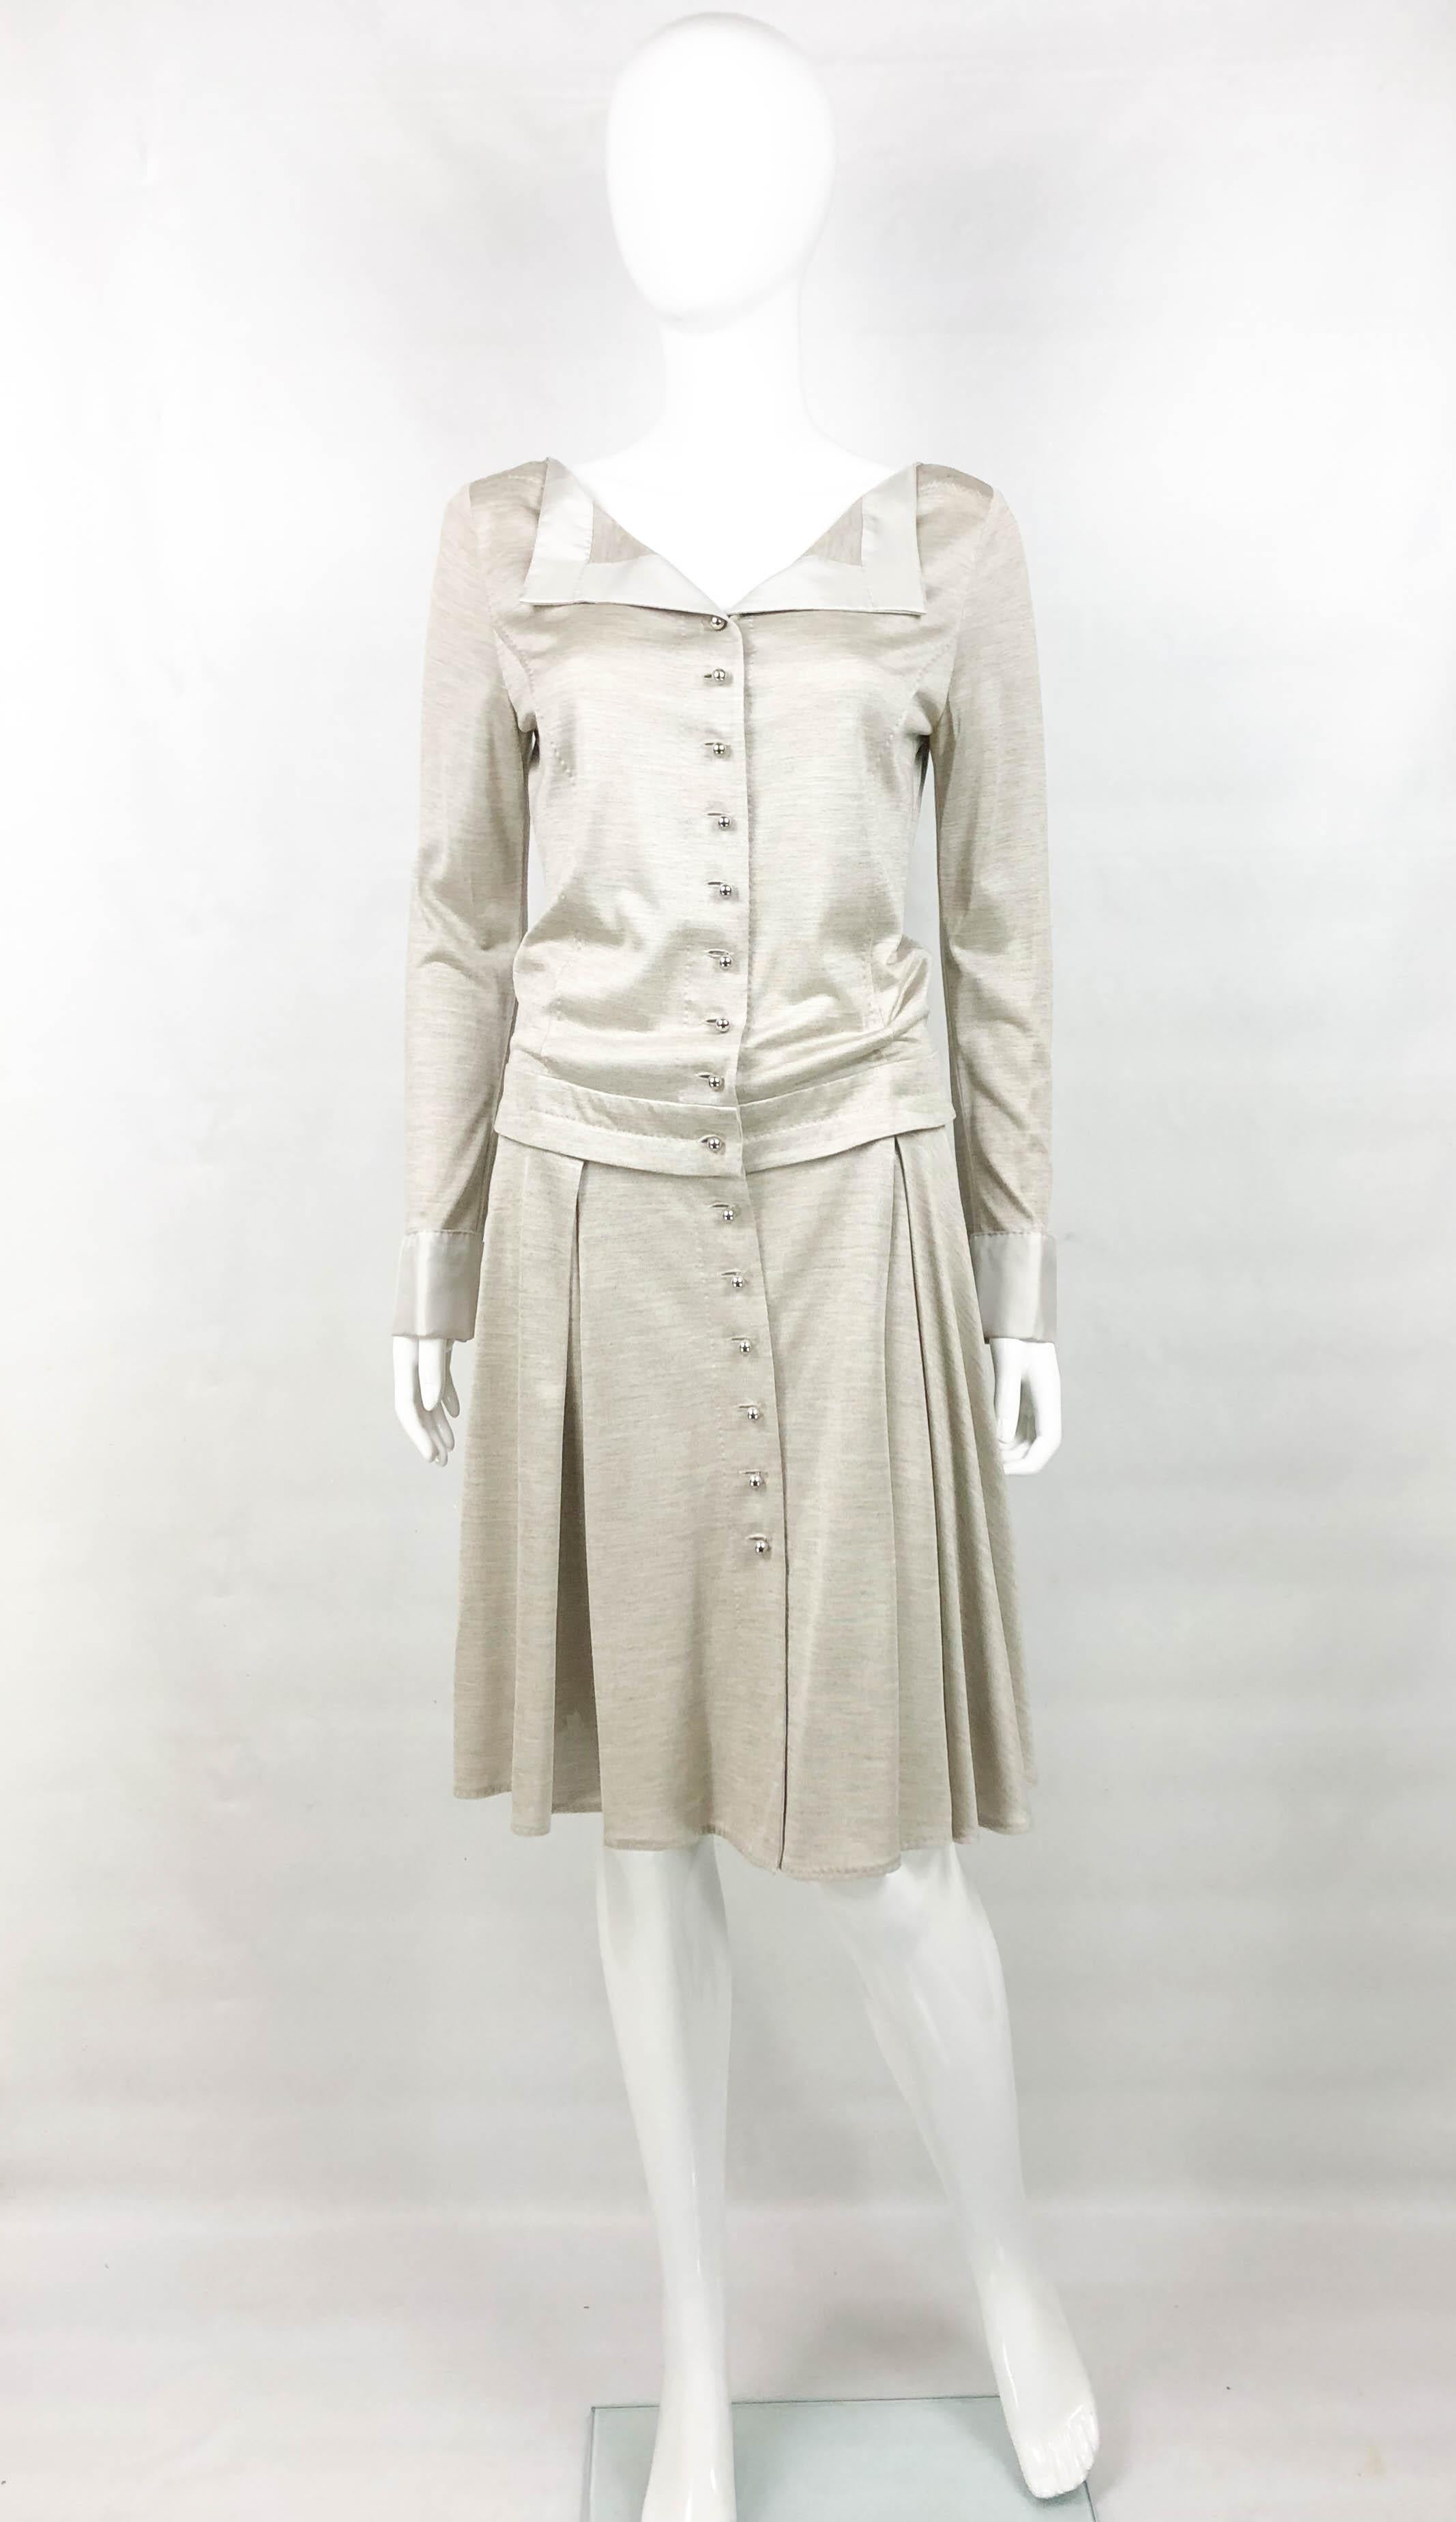 This stylish shirt dress by Louis Vuitton is made in silk jersey. With long sleeves and dropped waist, it hovers at knee height. The cuffs and lapel are made in silk. The silver-tone buttons are round and read Louis Vuitton. The cuffs come adorned